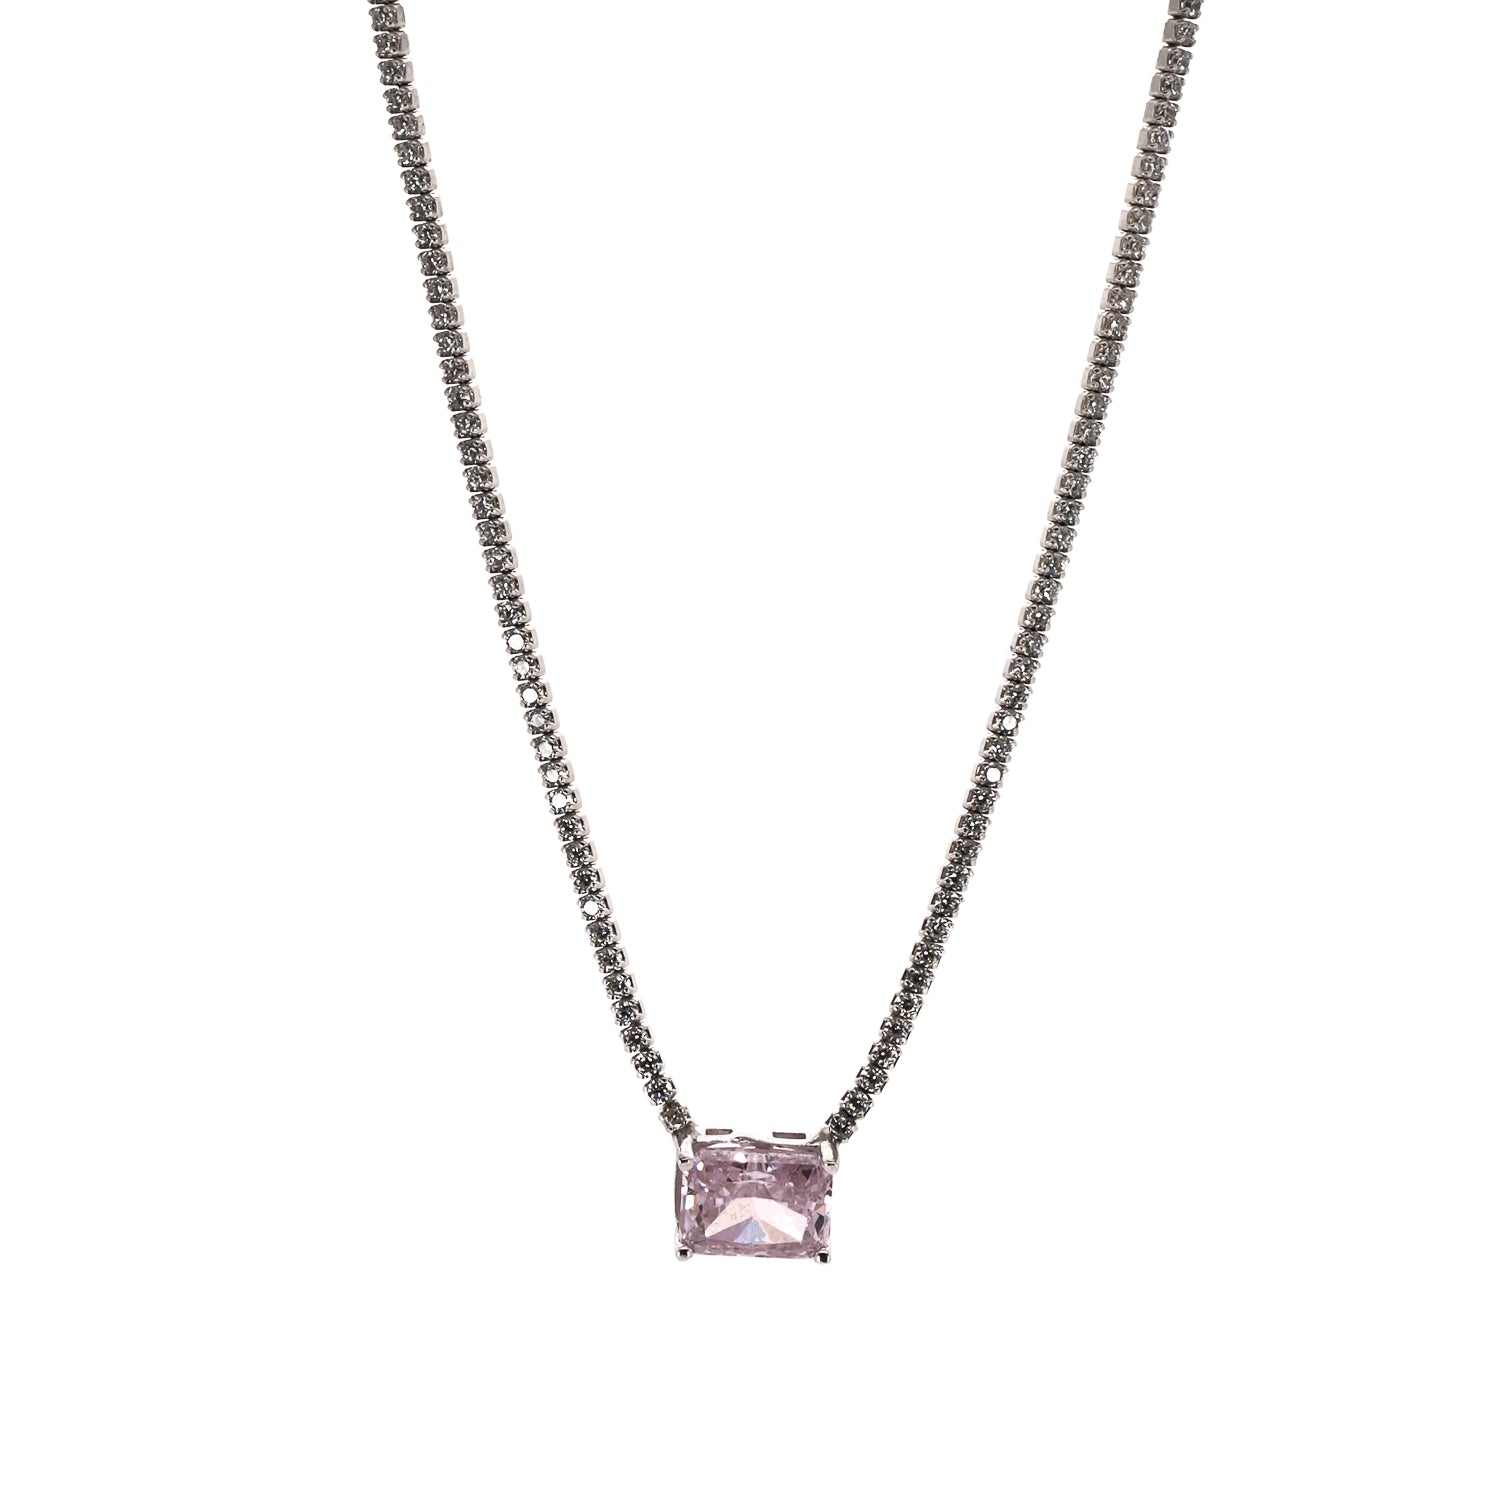 Sophisticated and Elegant: Perfect for Any Occasion Pink Quartz Silver Necklace